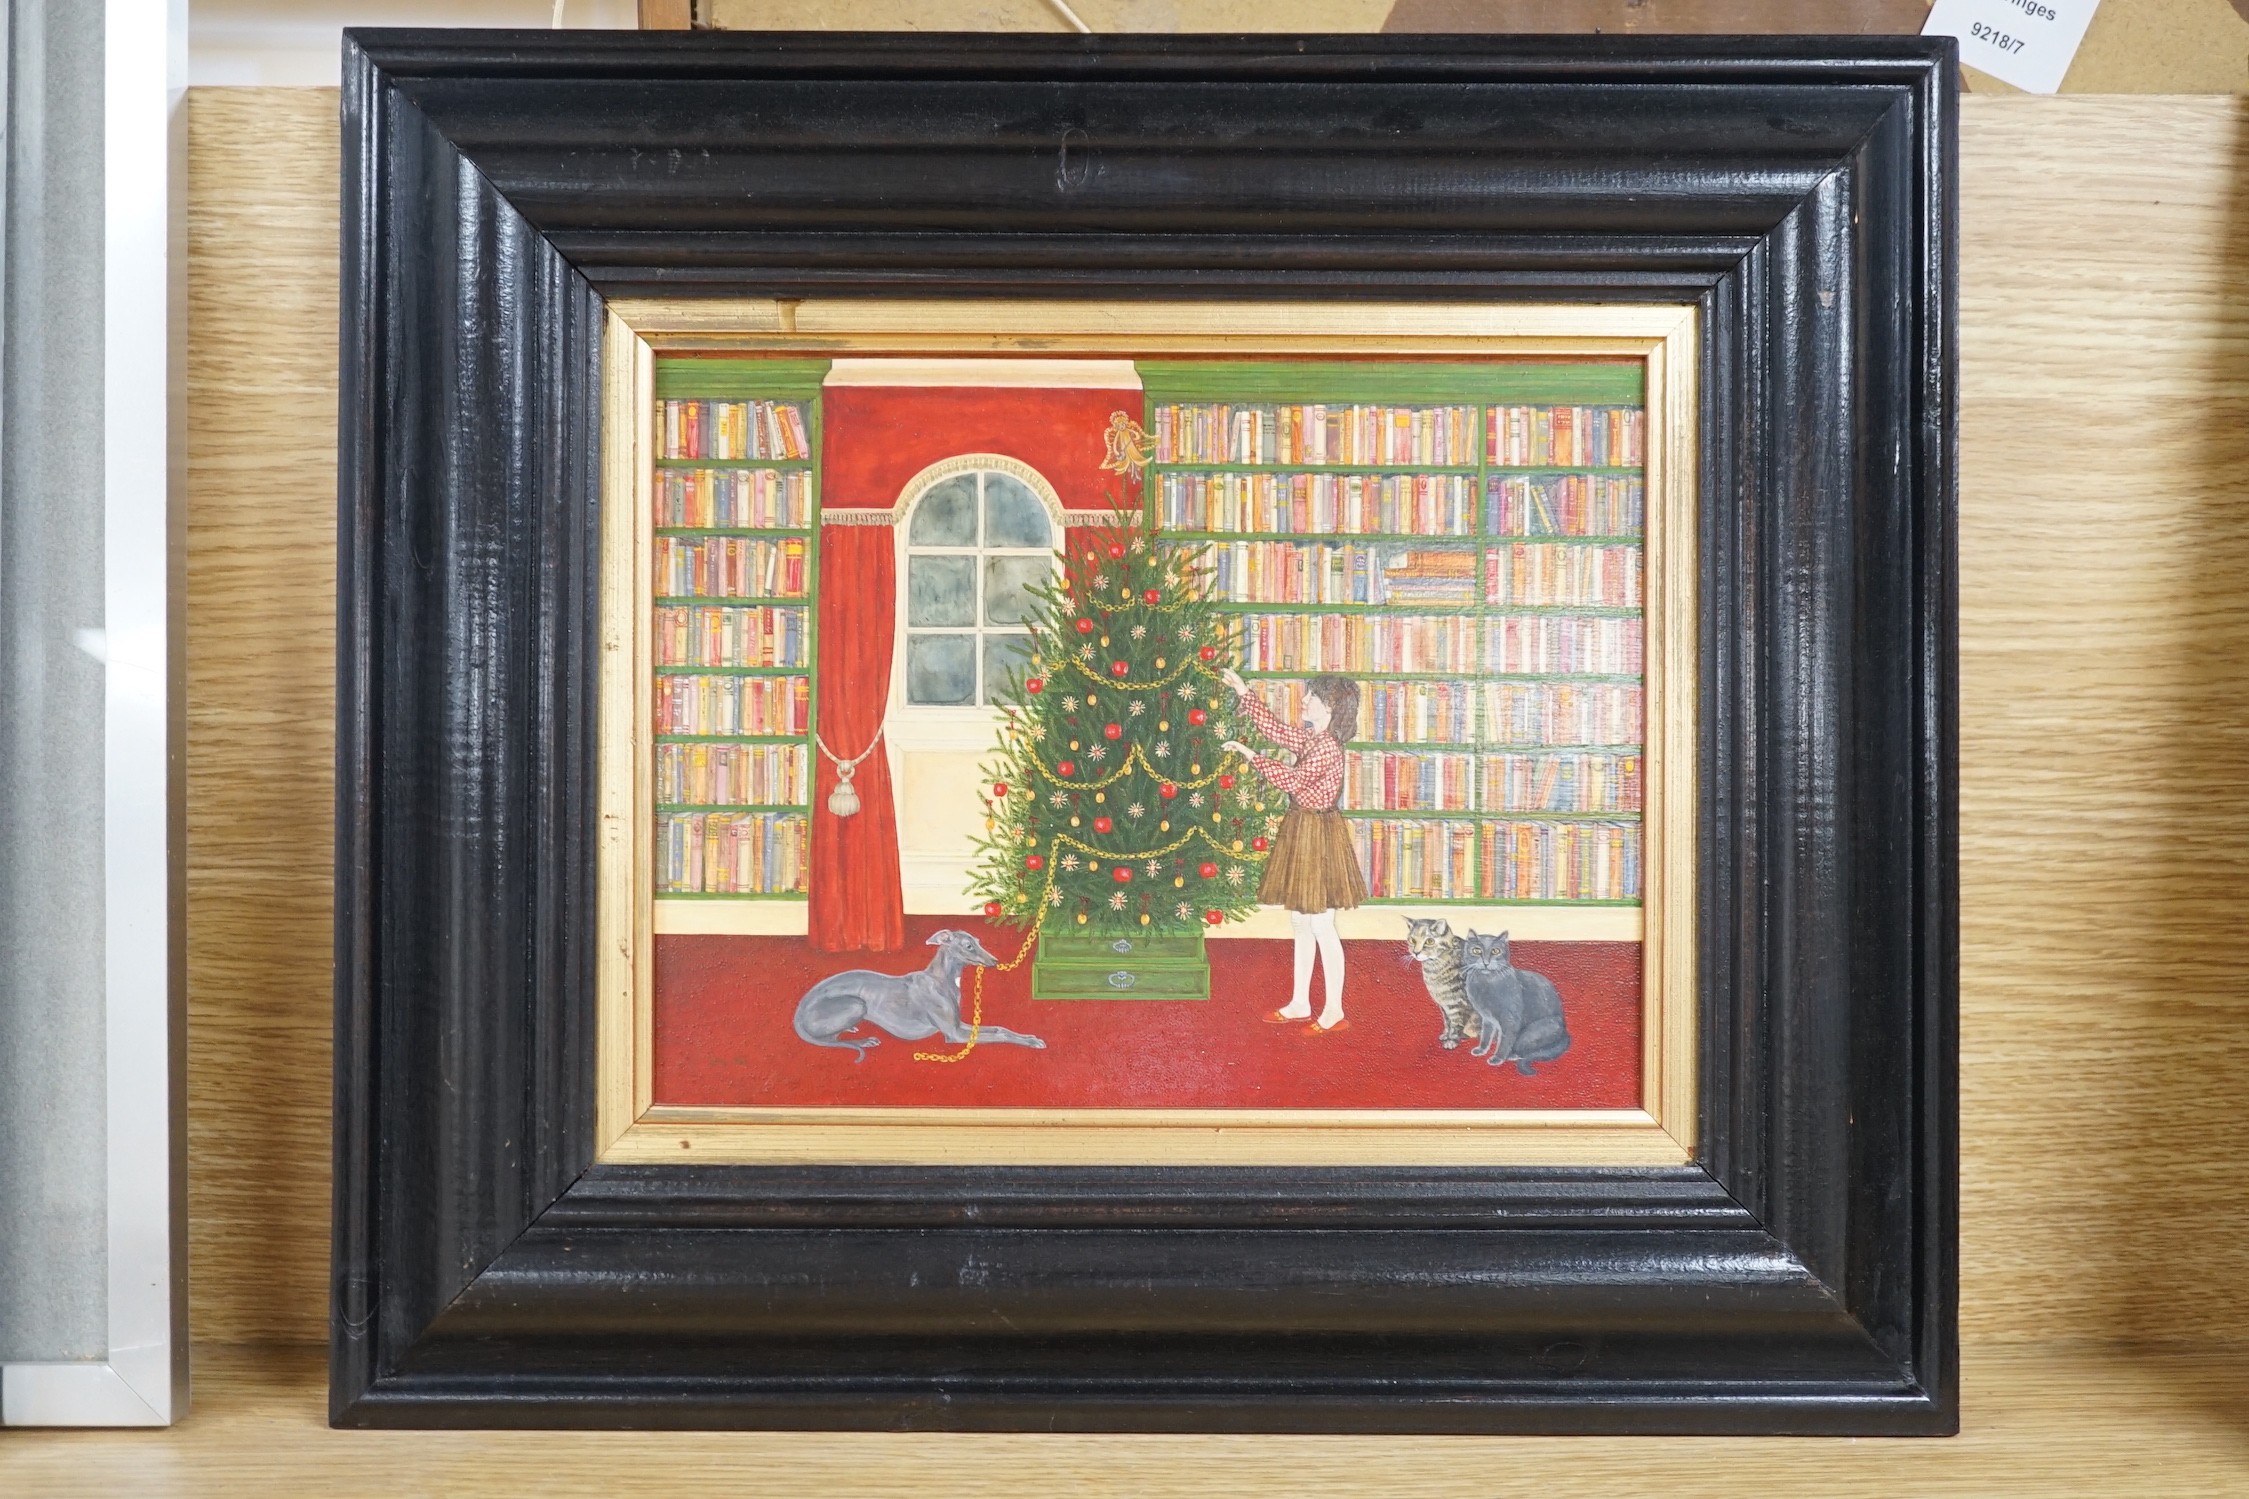 Modern British, oil on board, 'Dressing the Christmas Tree', initialled DTG and dated 1983, 19 x 24.5cm